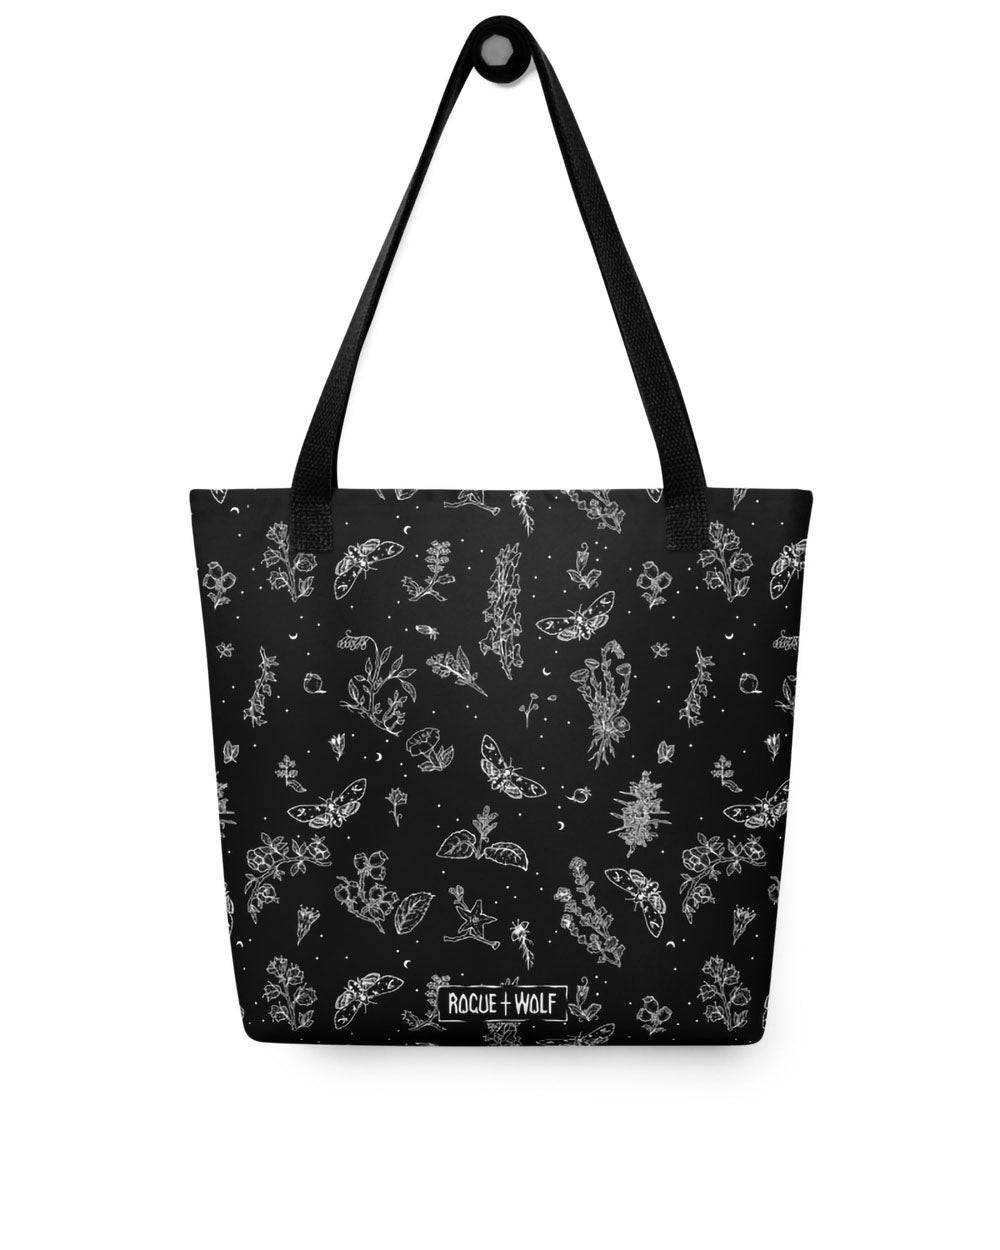 Nightshade Tote Bag -  Vegan Gothic Fashion - Alternative Occult Ethical Style - On Demand Eco-friendly Sustainable Product